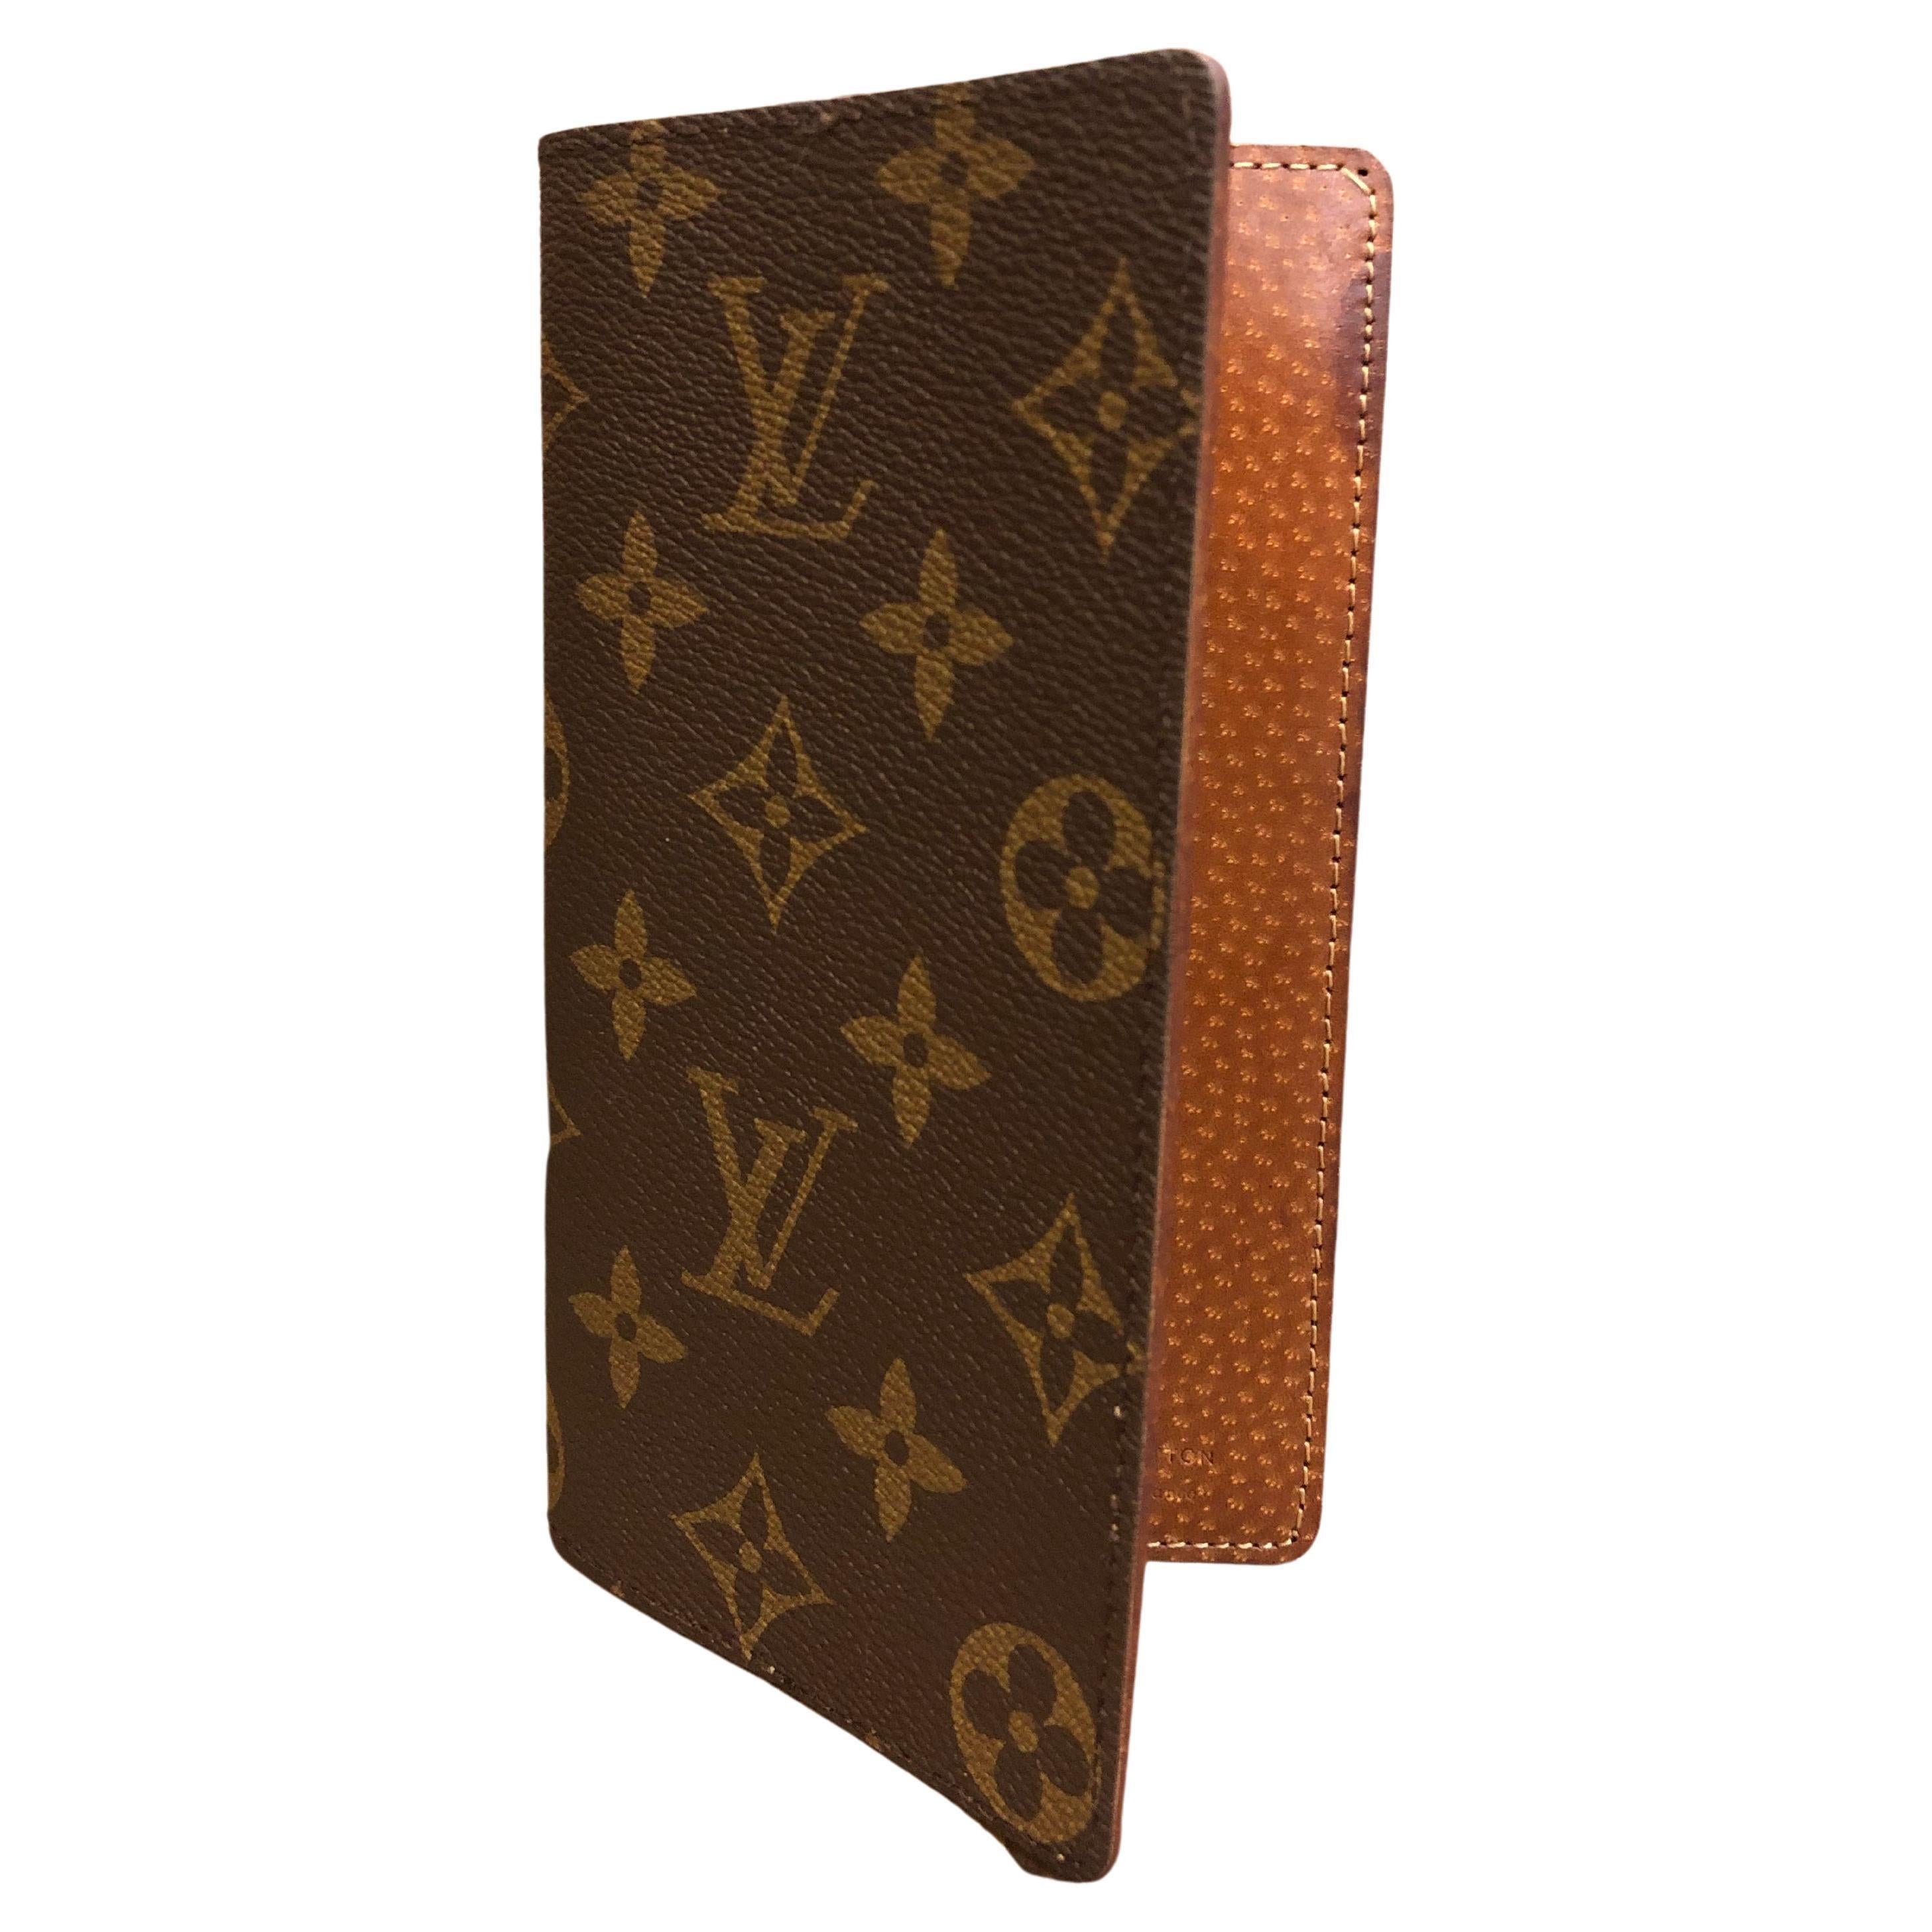 This vintage LOUIS VUITTON address telephone book is crafted of LOUIS VUITTON coated monogram canvas lined with pigskin leather. It comes with the original LV phone booklet (stained with visible wear). 

This LOUIS VUITTON was manufactured prior to